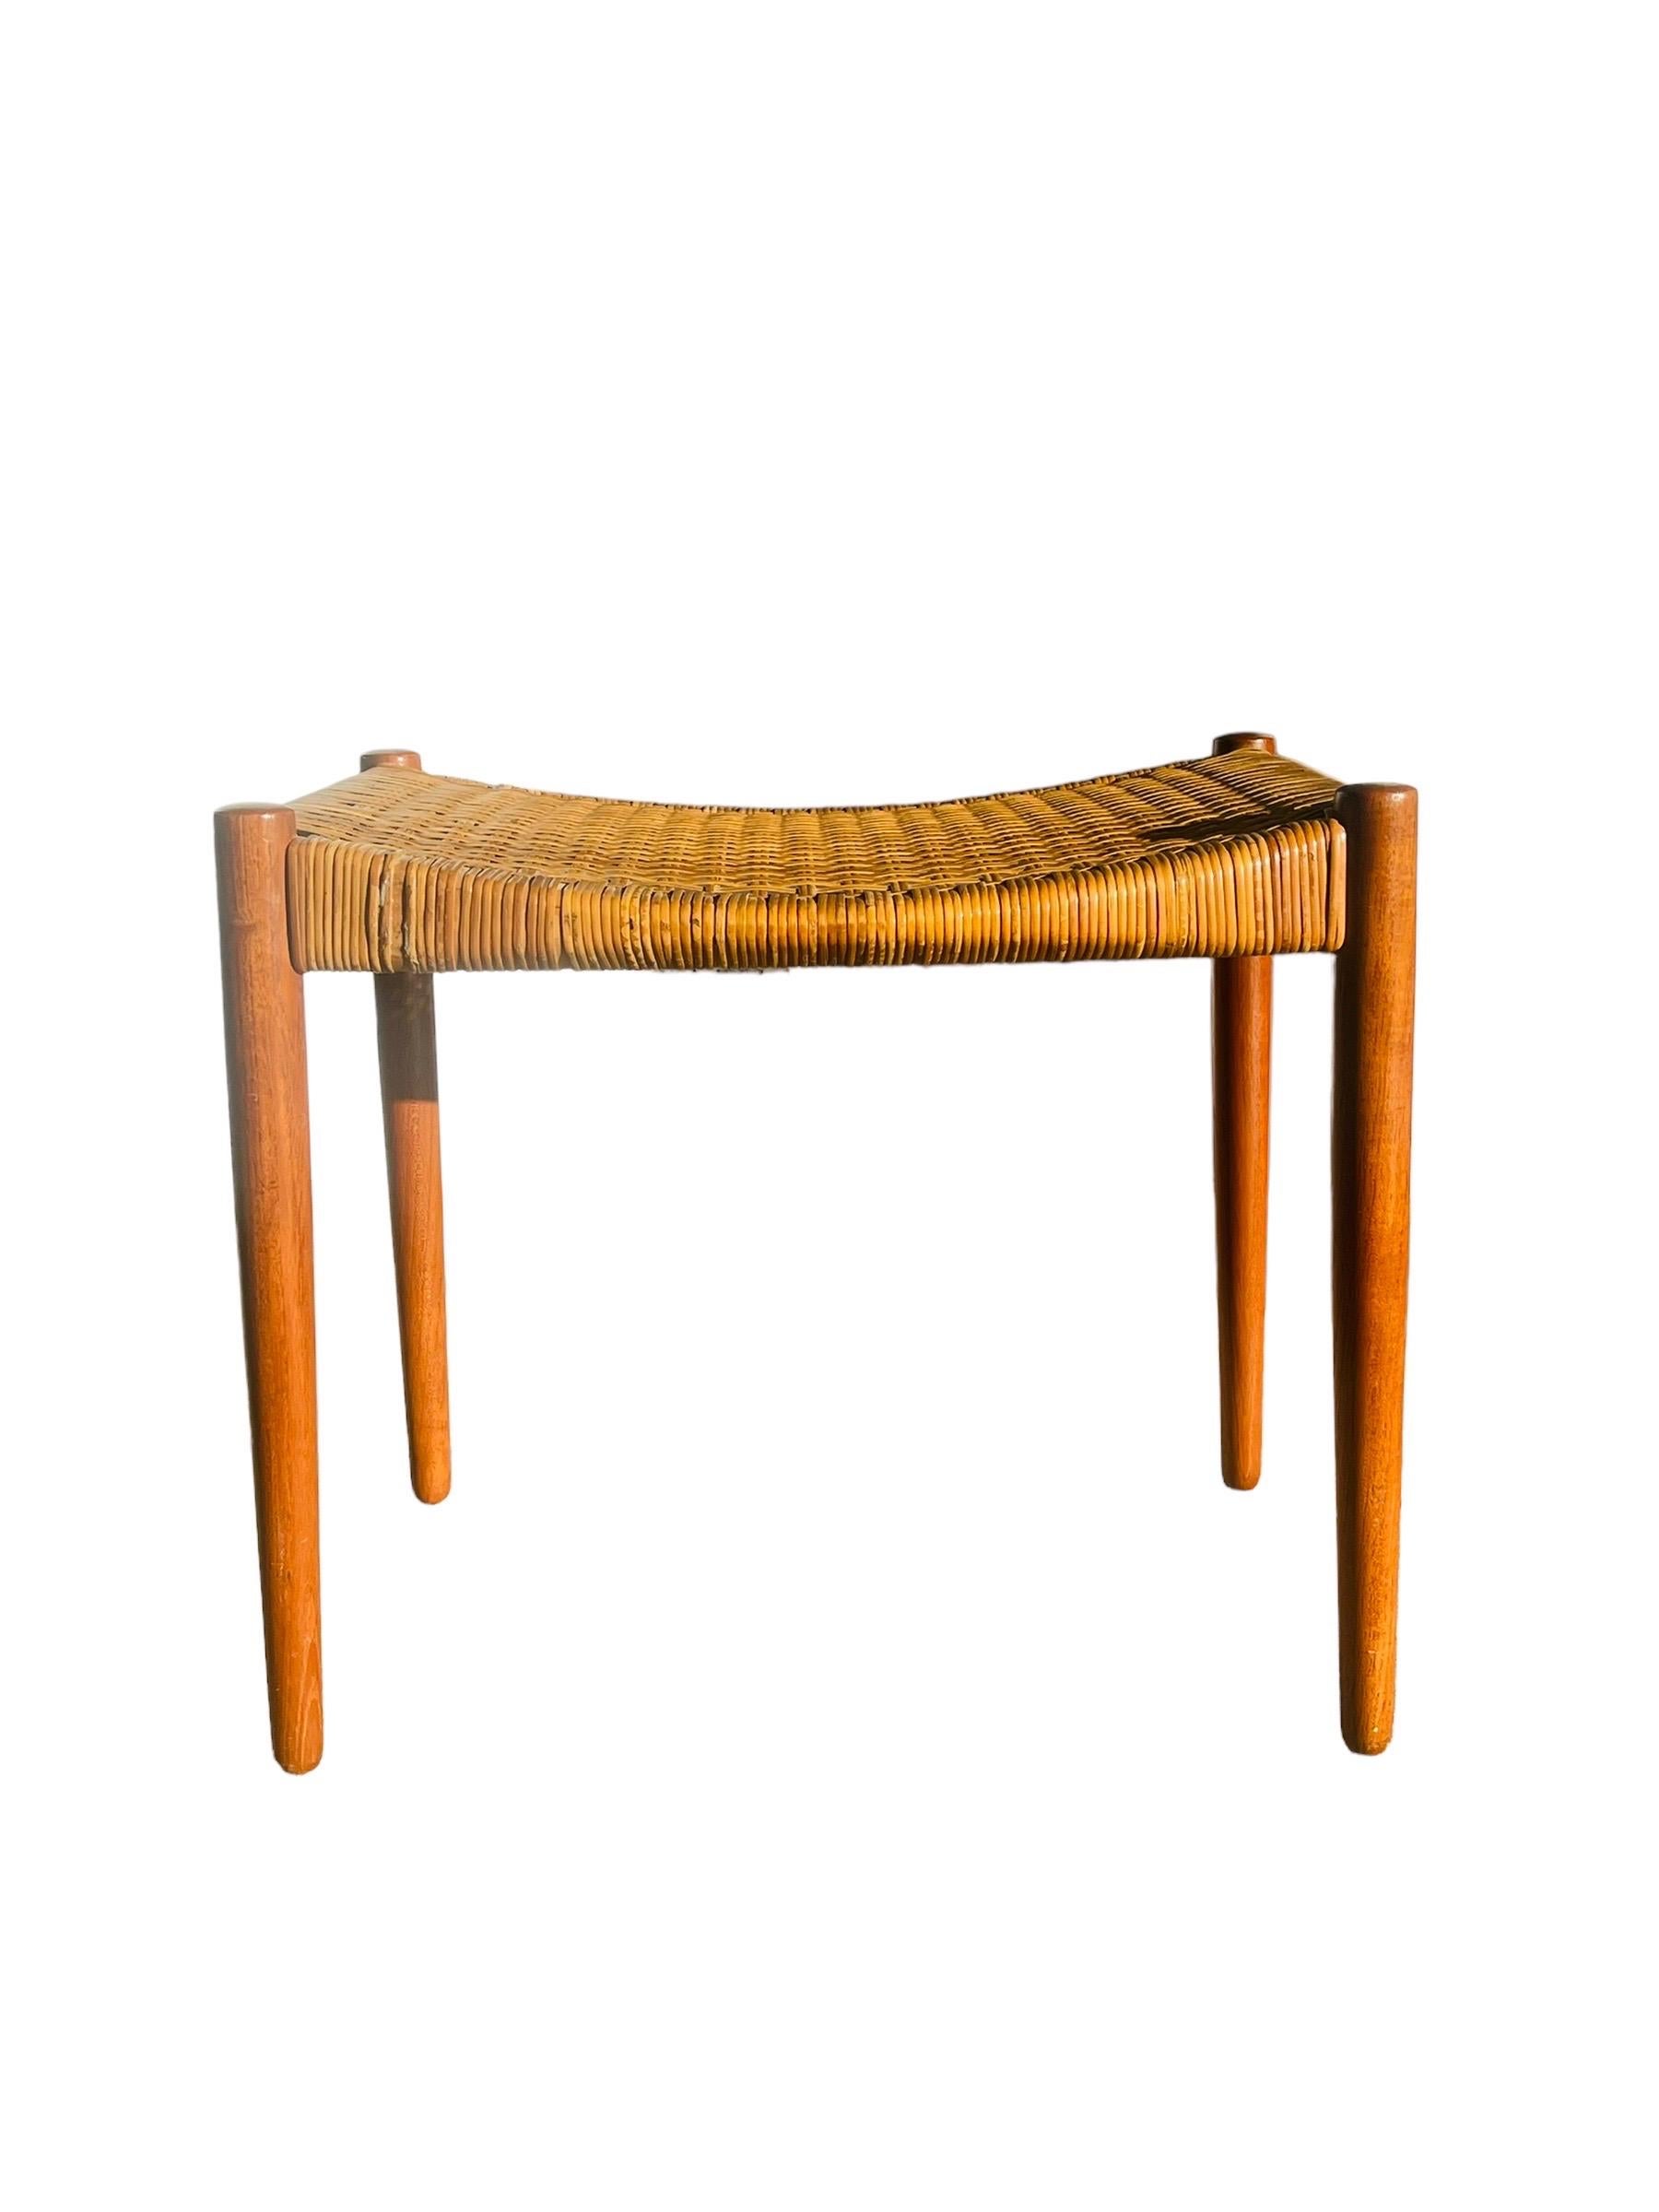 Rare Danish modern Teak footstool designed by Aksel Bender Madsen & Ejner Larsen. Produced by cabinetmaker Willy Beck in Denmark. This stool is in good original & vintage condition with  wear consistent with age and use. 

W 22